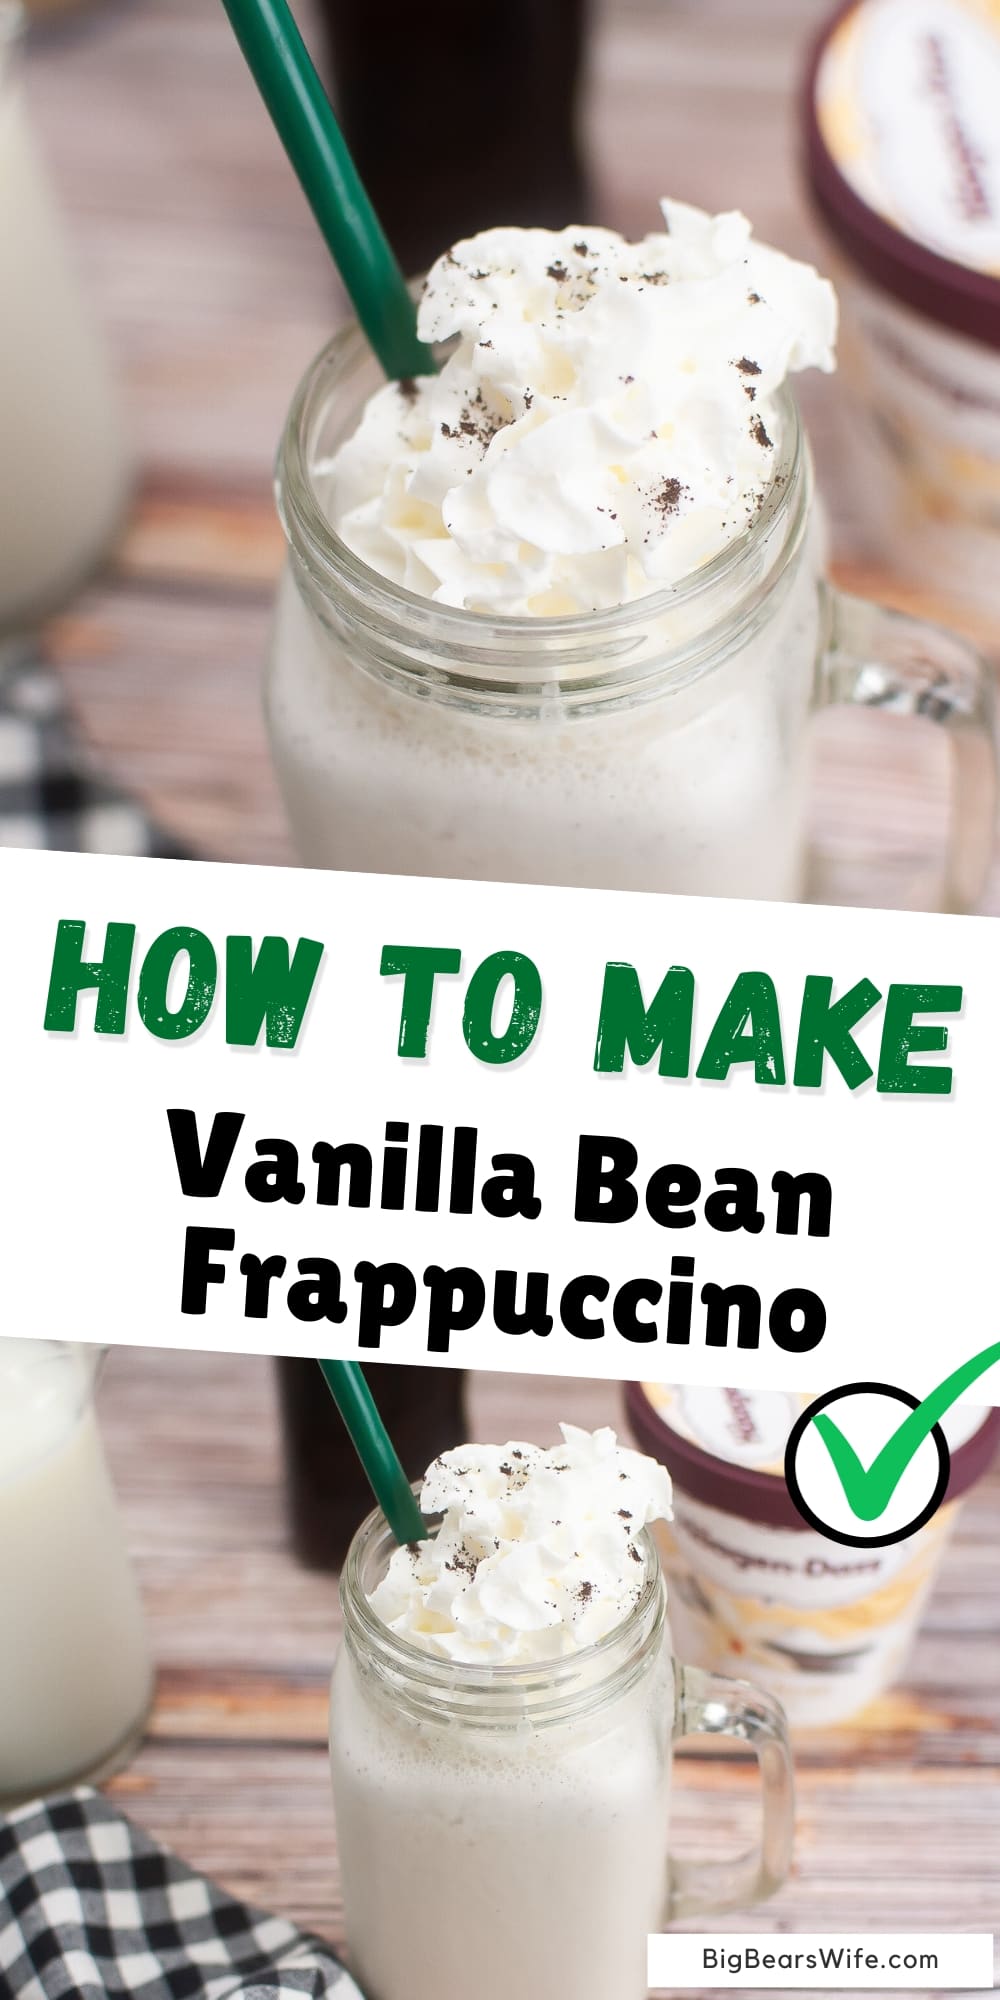 Tired of waiting in long lines at the coffee shop? With this homemade vanilla bean frappuccino recipe, you can skip the hassle and make your favorite icy beverage right in your own kitchen. This homemade Frappuccino is sure to satisfy your craving. via @bigbearswife